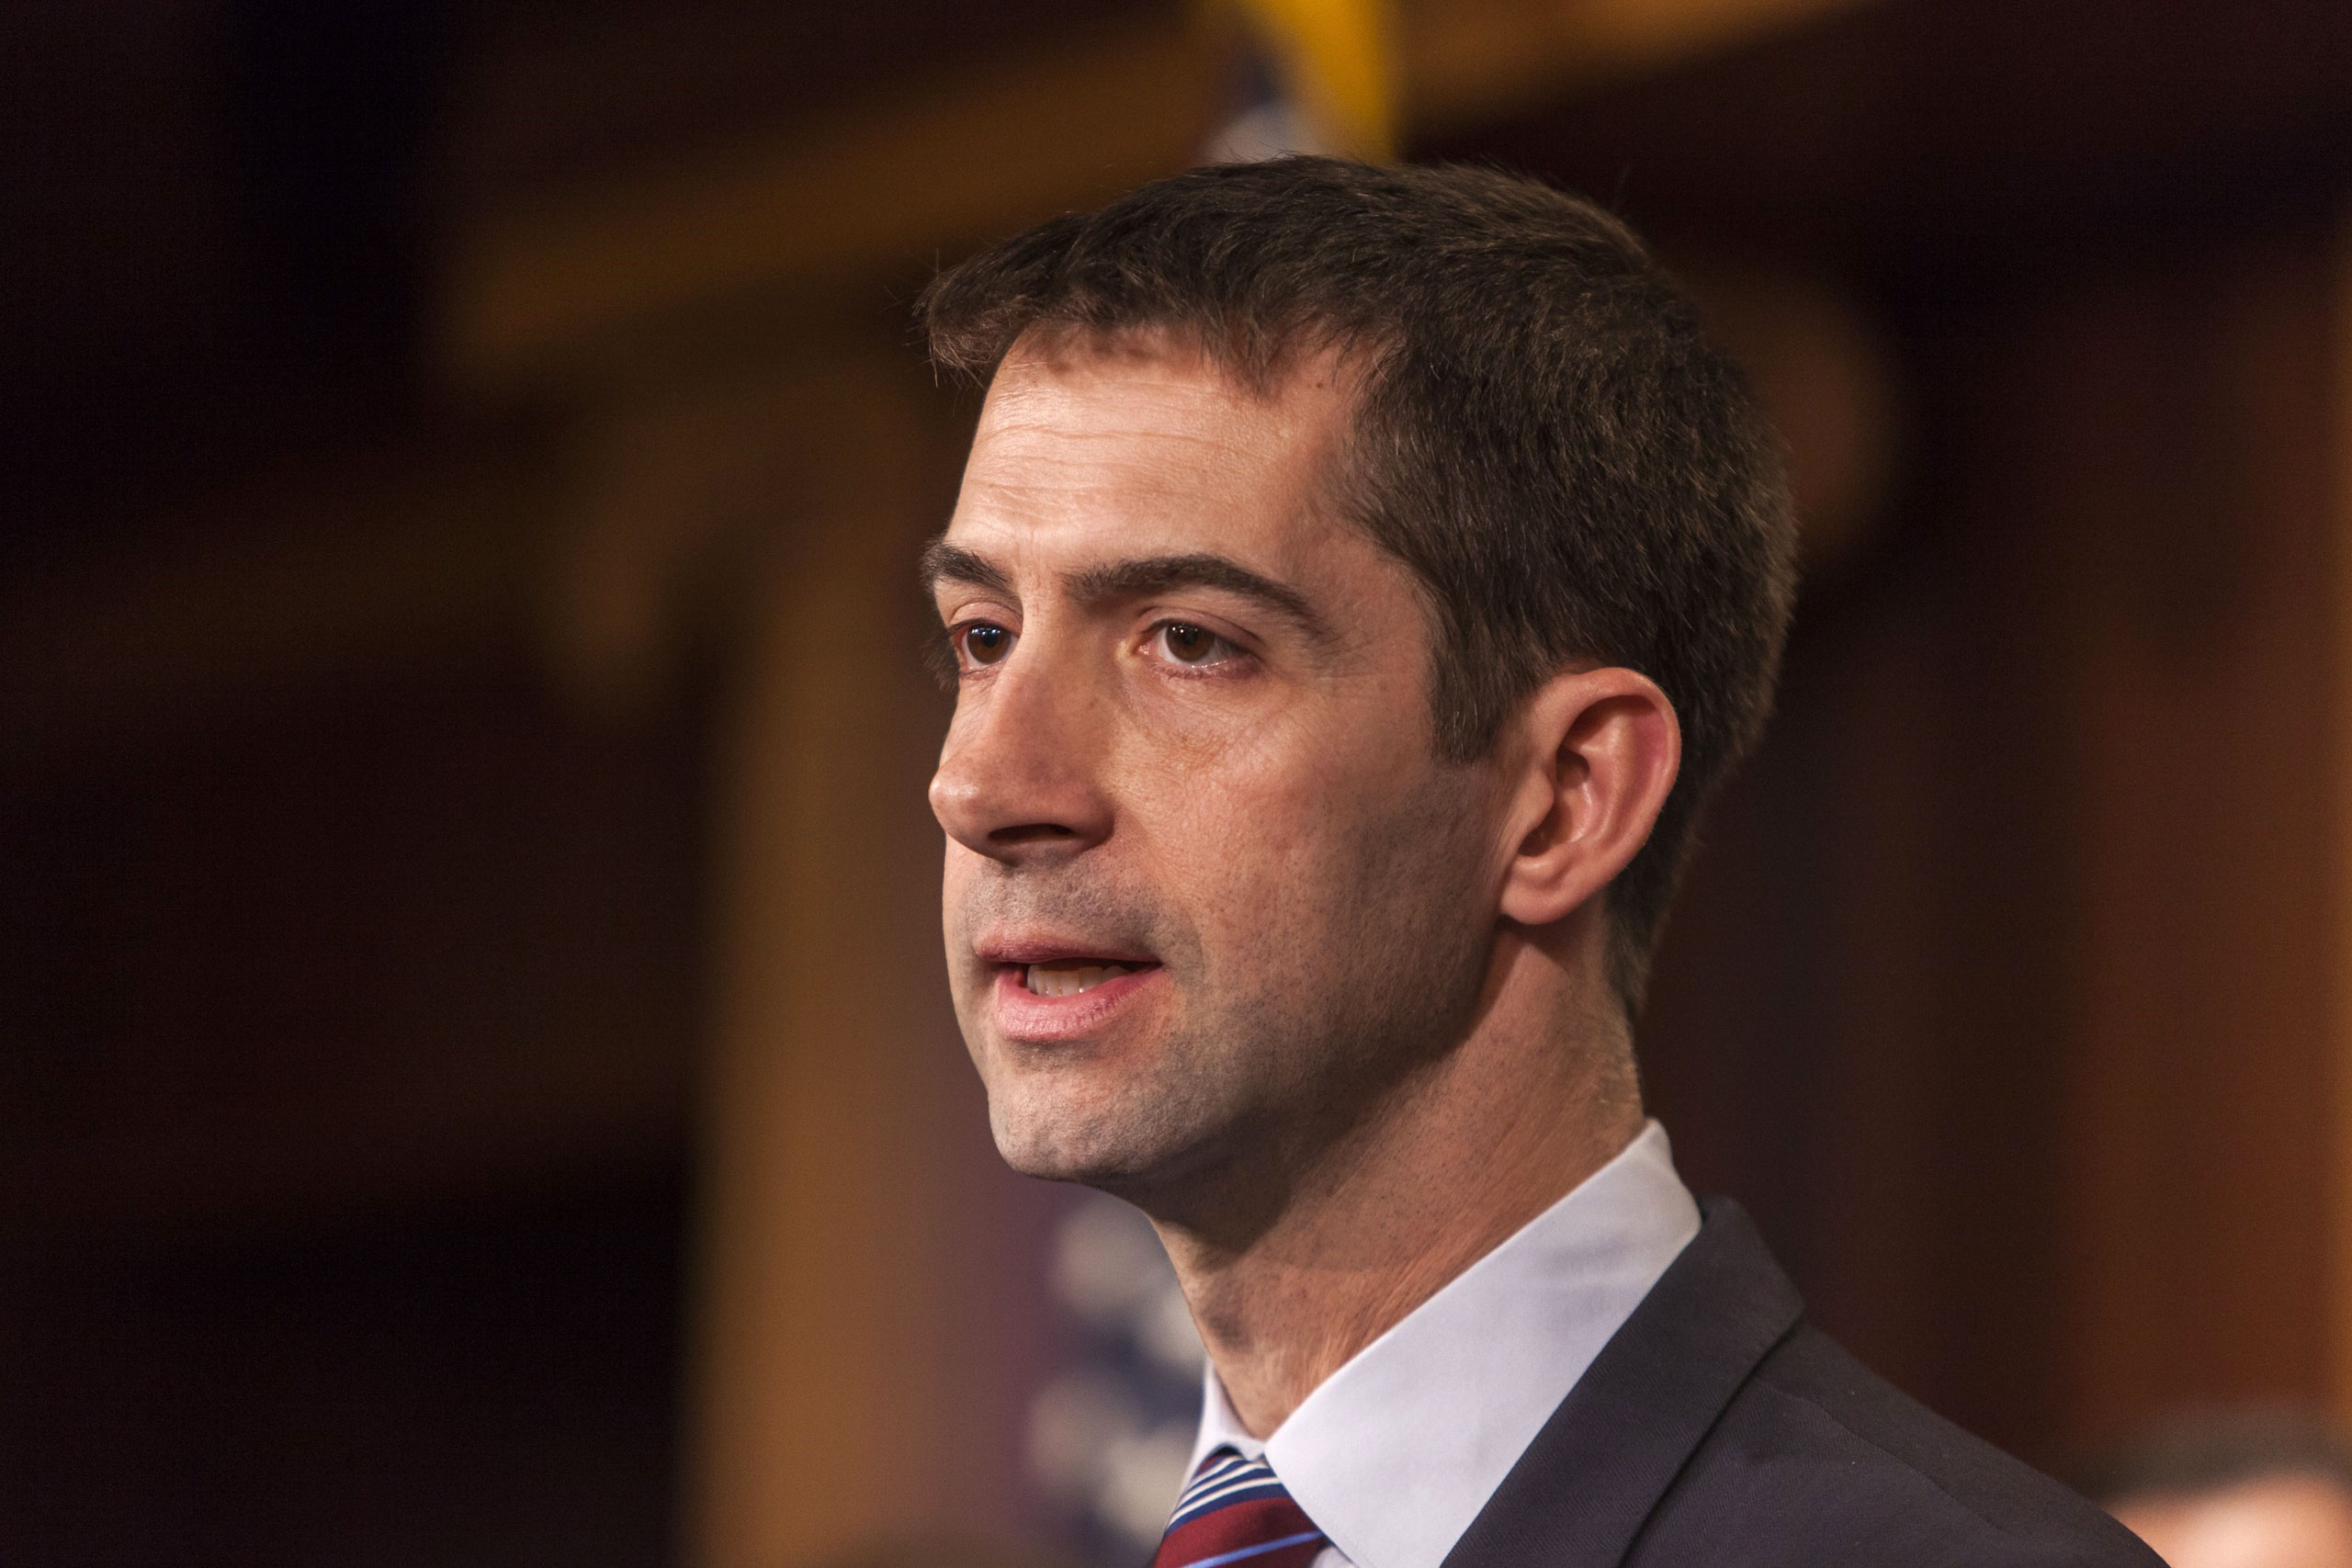 Senator Tom Cotton speaks during a news conference with members of the Senate Armed Services Committee about arming Ukraine in the fight against Russia in Washington, D.C. on Feb. 5, 2015. (Samuel Corum—Anadolu Agency/Getty Images)